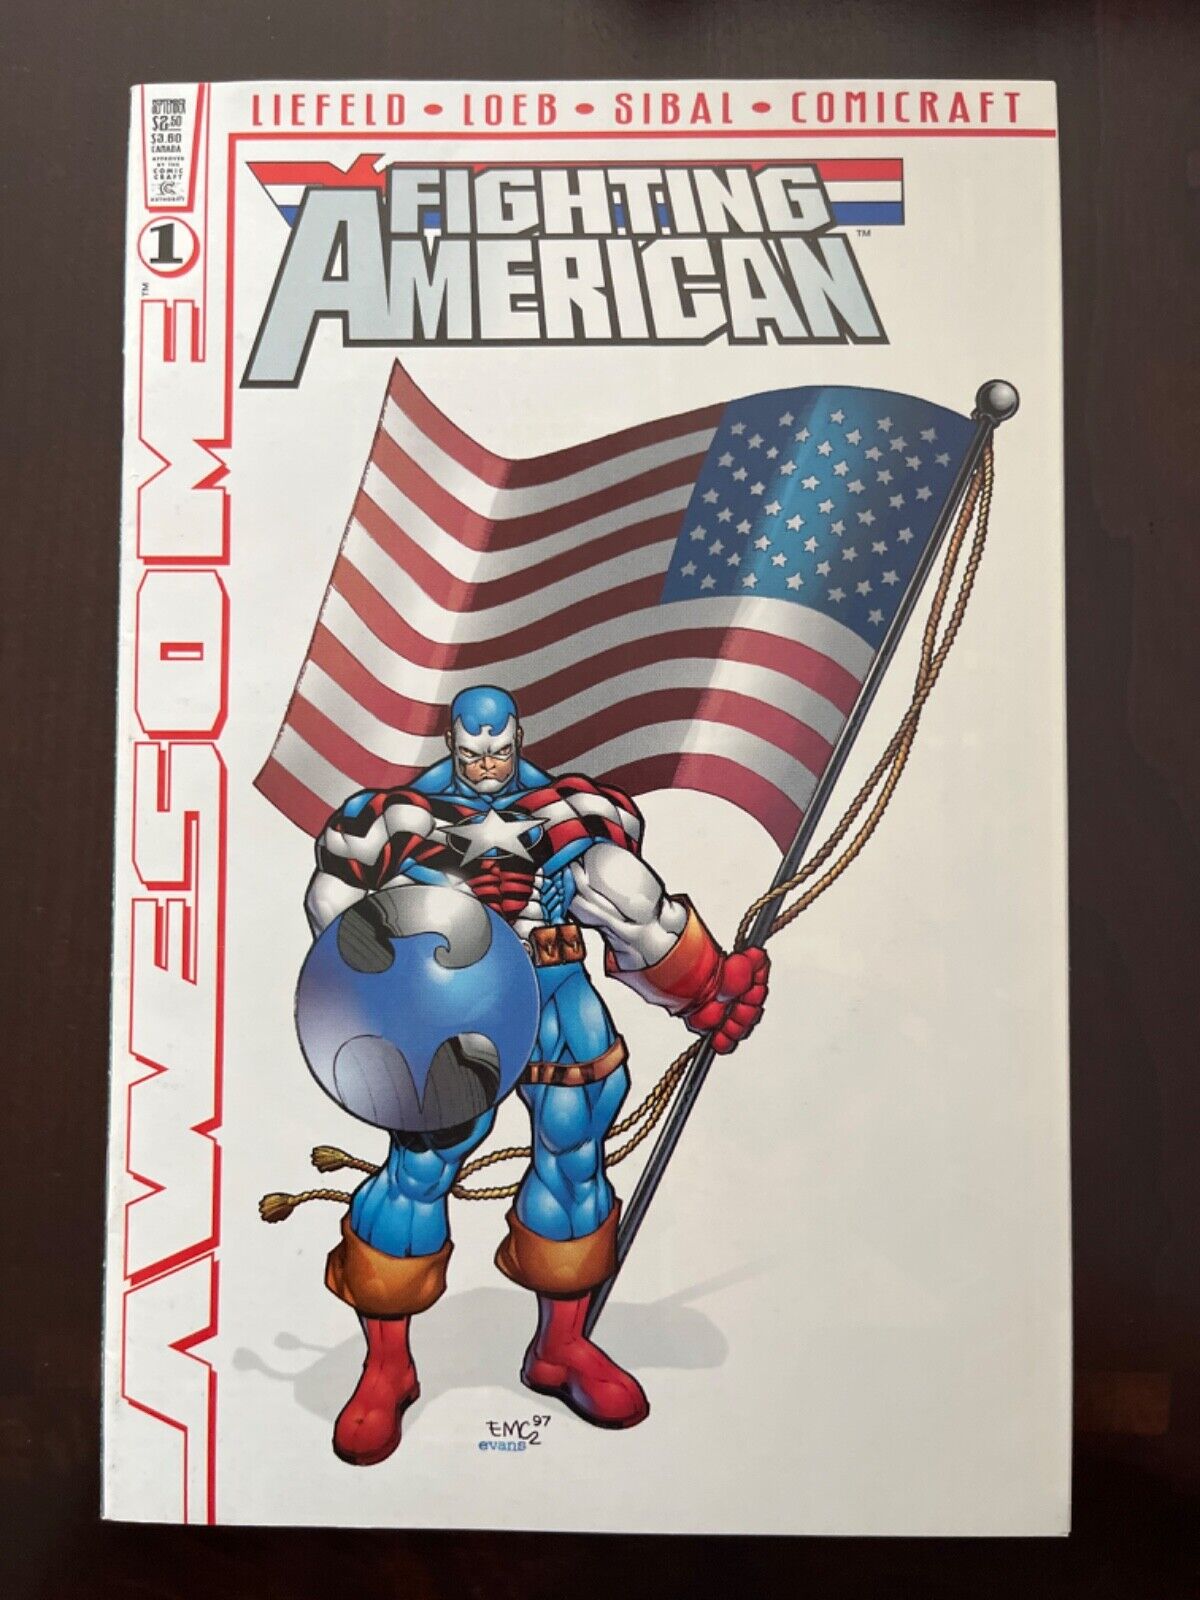 Fighting American #1 Vol. 1 (Awesome, 1997) VF